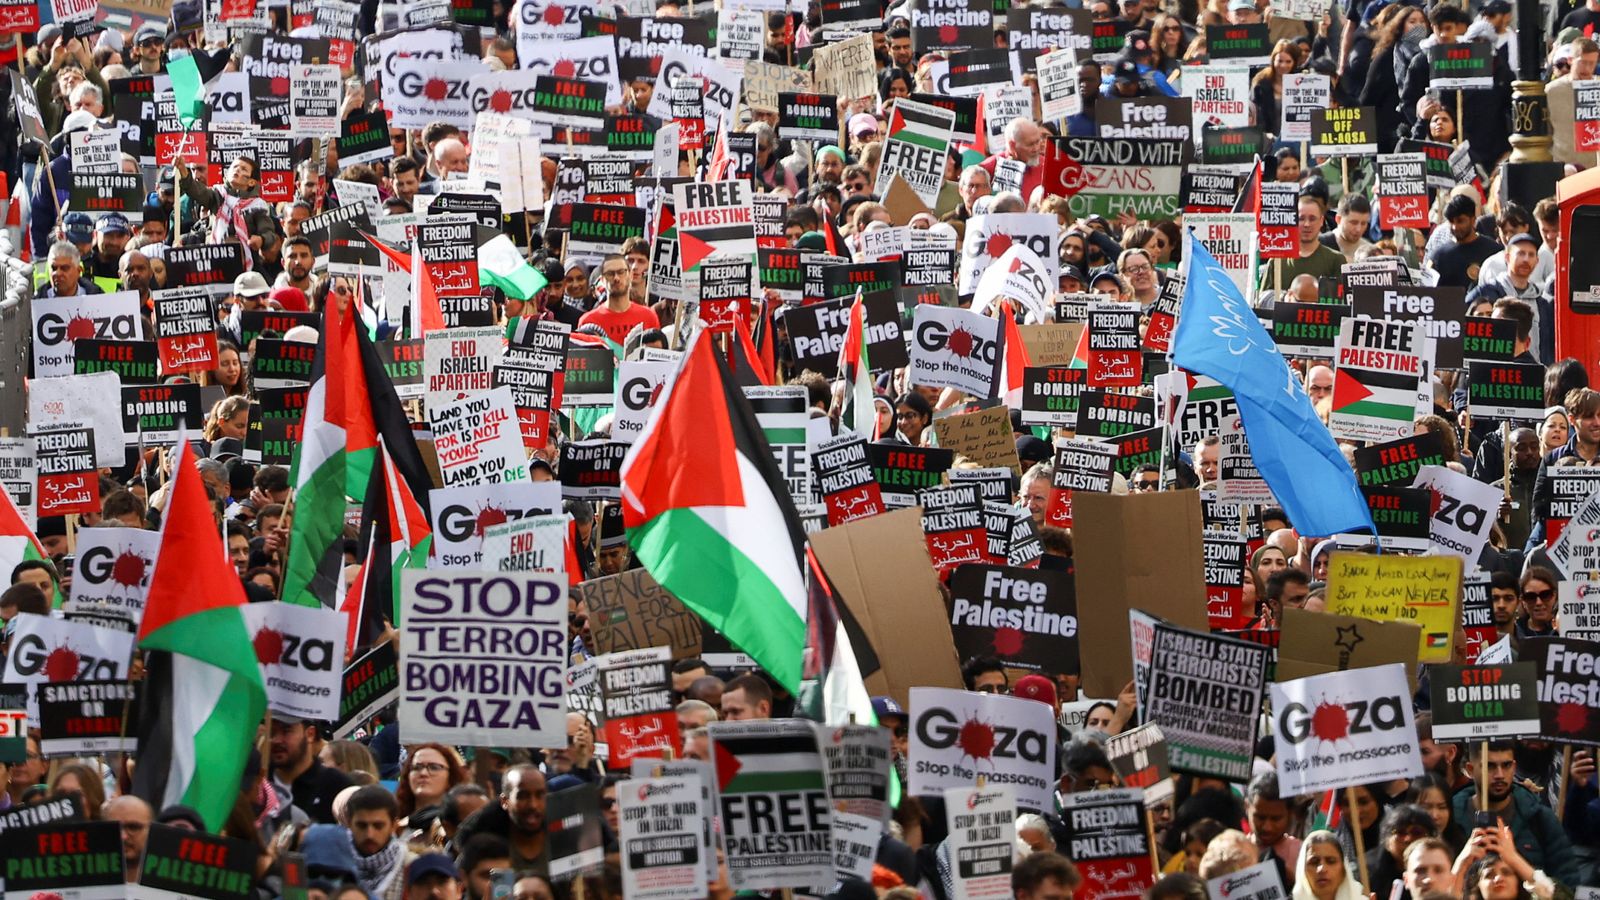 Israel-Hamas war: Around 100,000 people descend on central London for pro-Palestine march